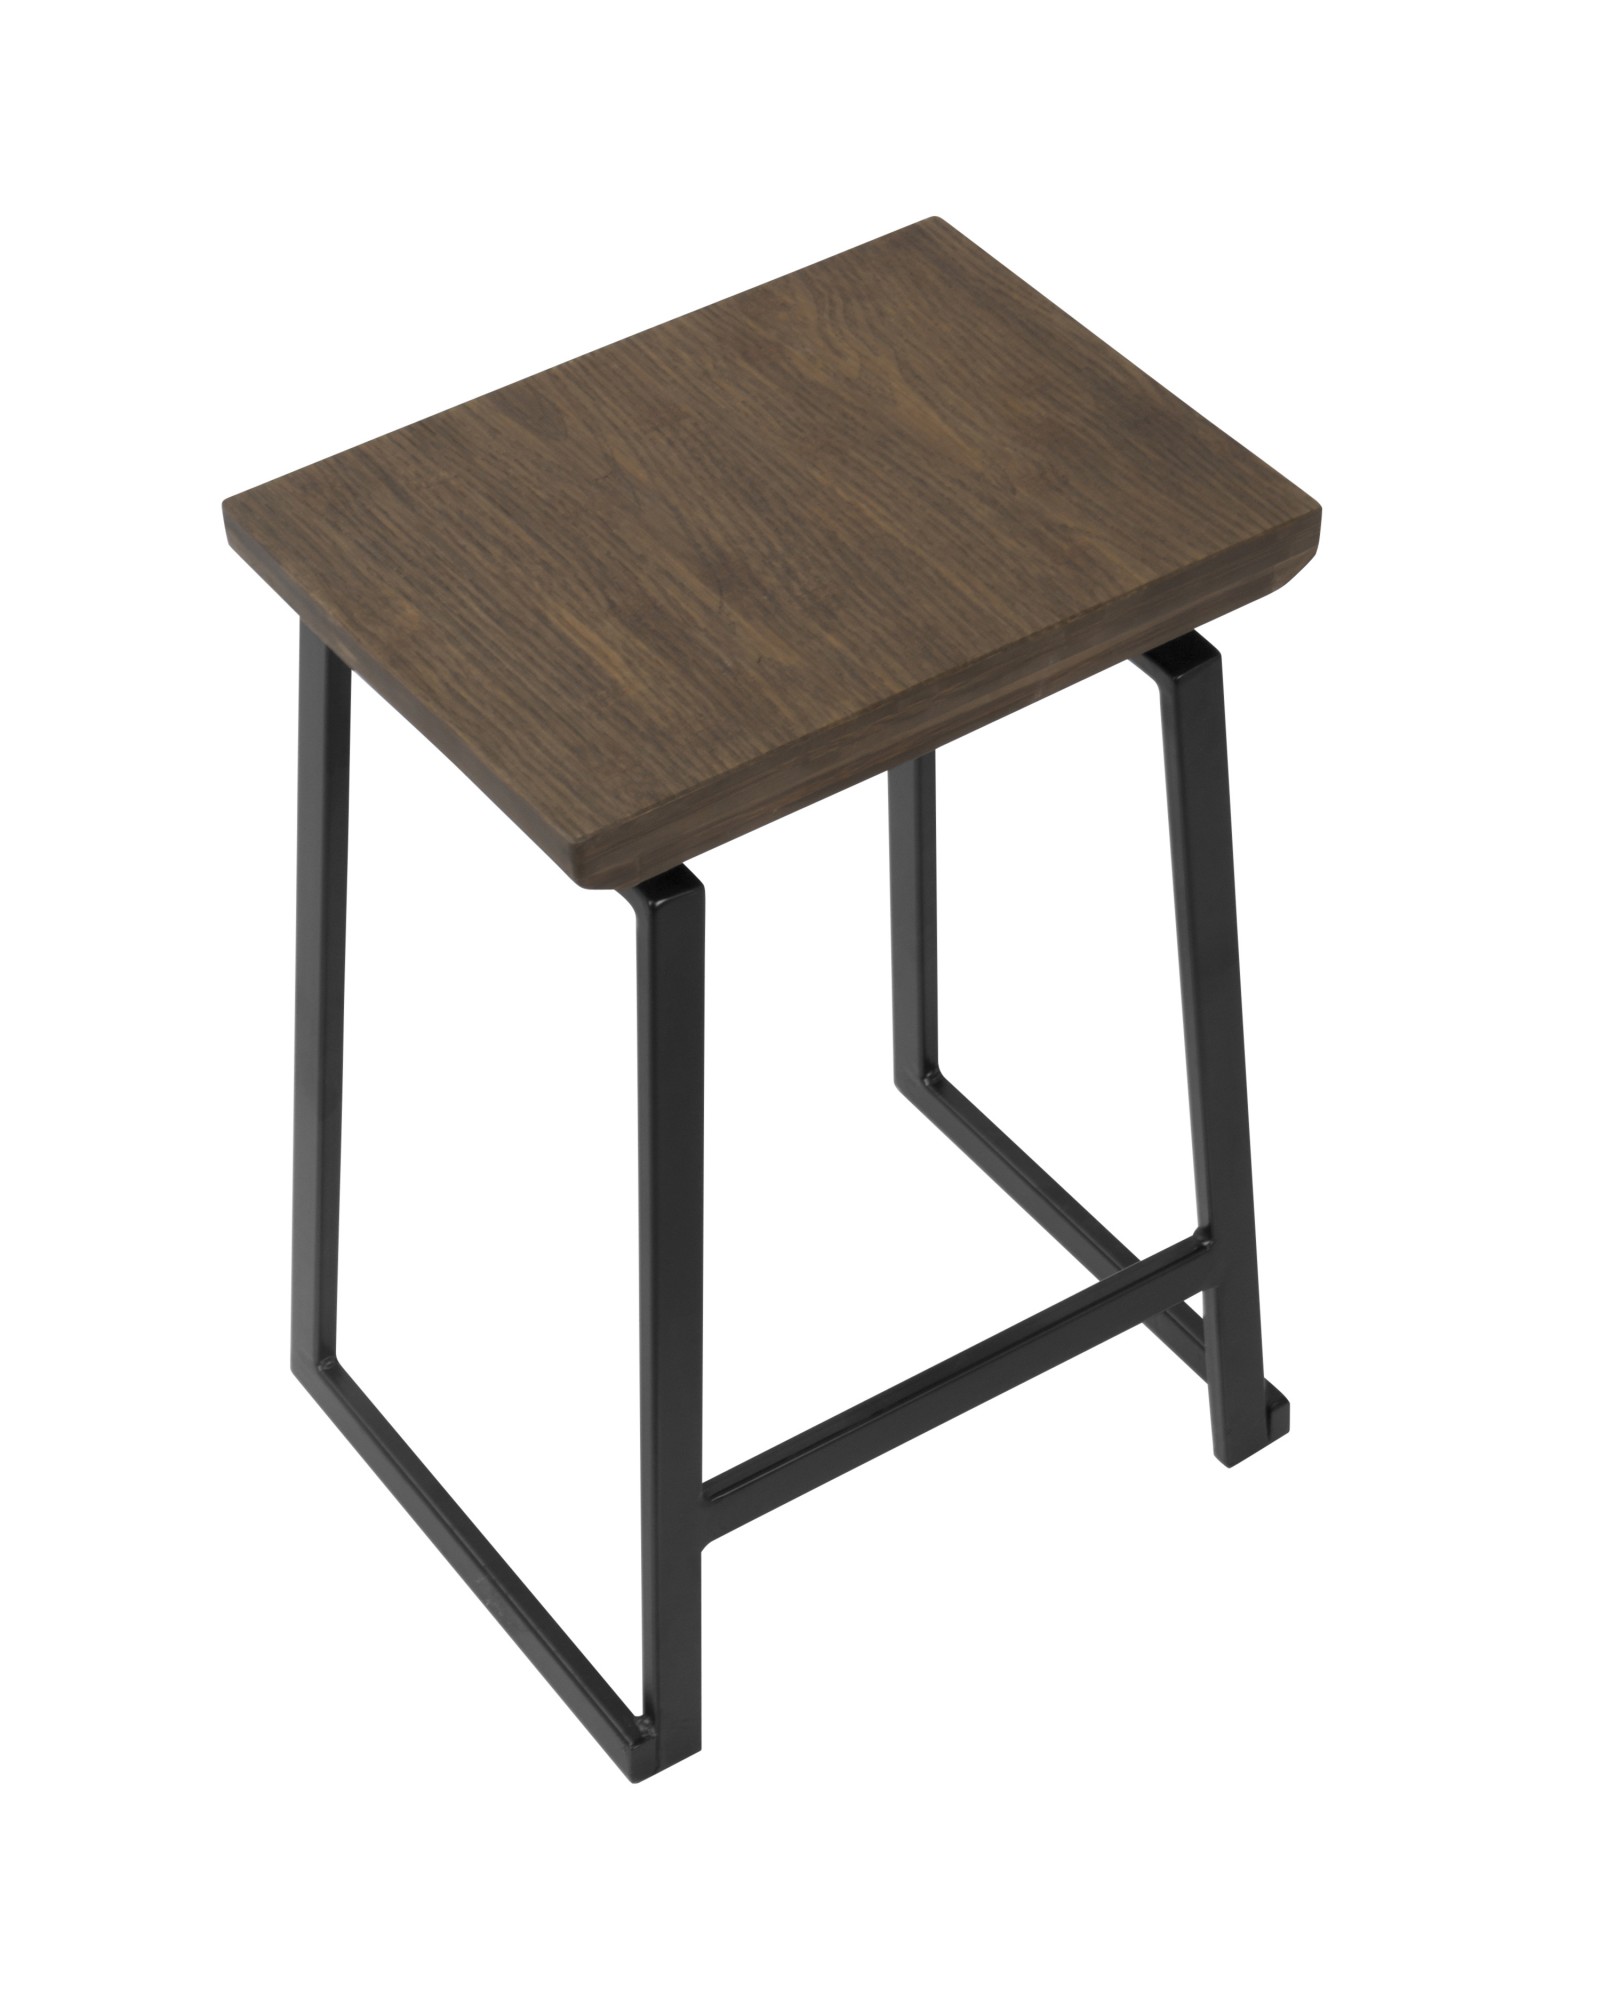 Geo Industrial Counter Stool in Black with Brown Wood Seat - Set of 2